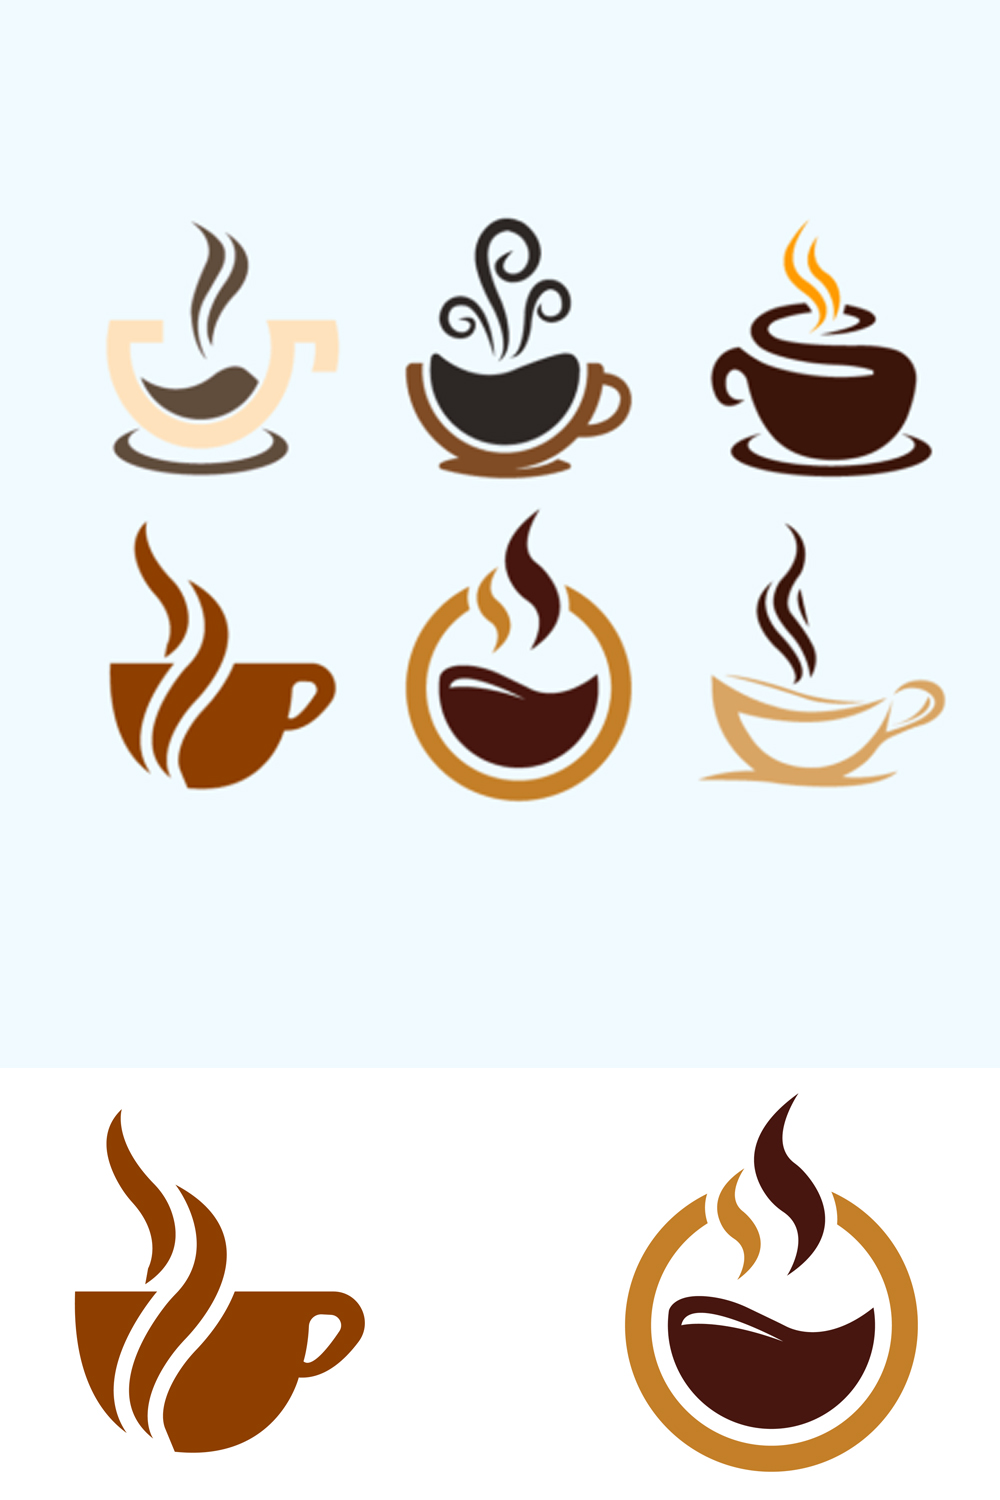 Cafe-Graphics bundle for your cafe logo pinterest preview image.